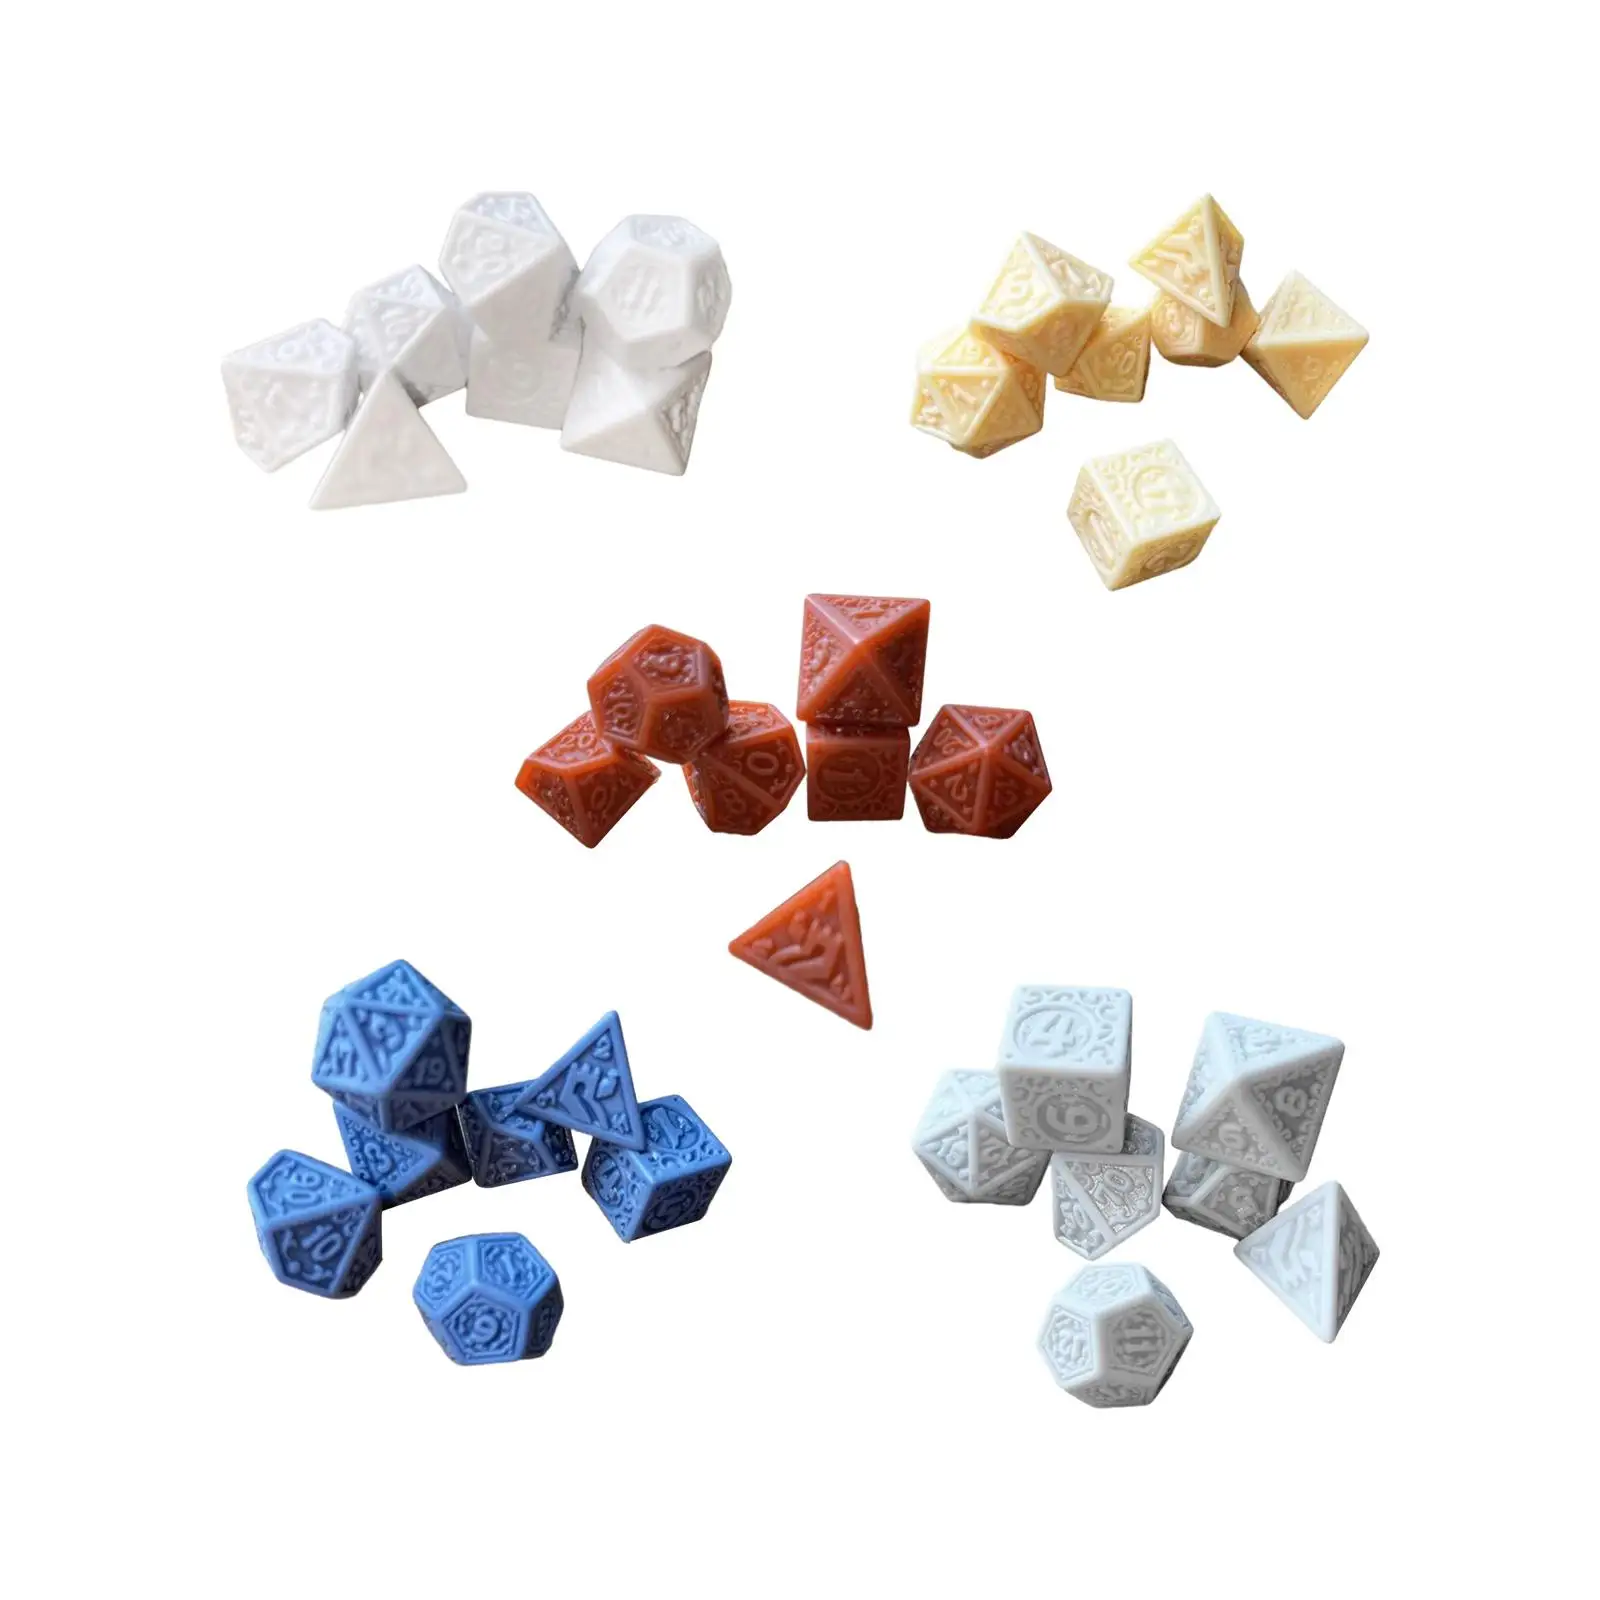 

7x Polyhedral Dices, Multi Sided Game Dices, Acrylic D20 D12 D10 D8 D6 D4, Set for KTV Bar, Card Games Role Playing Game